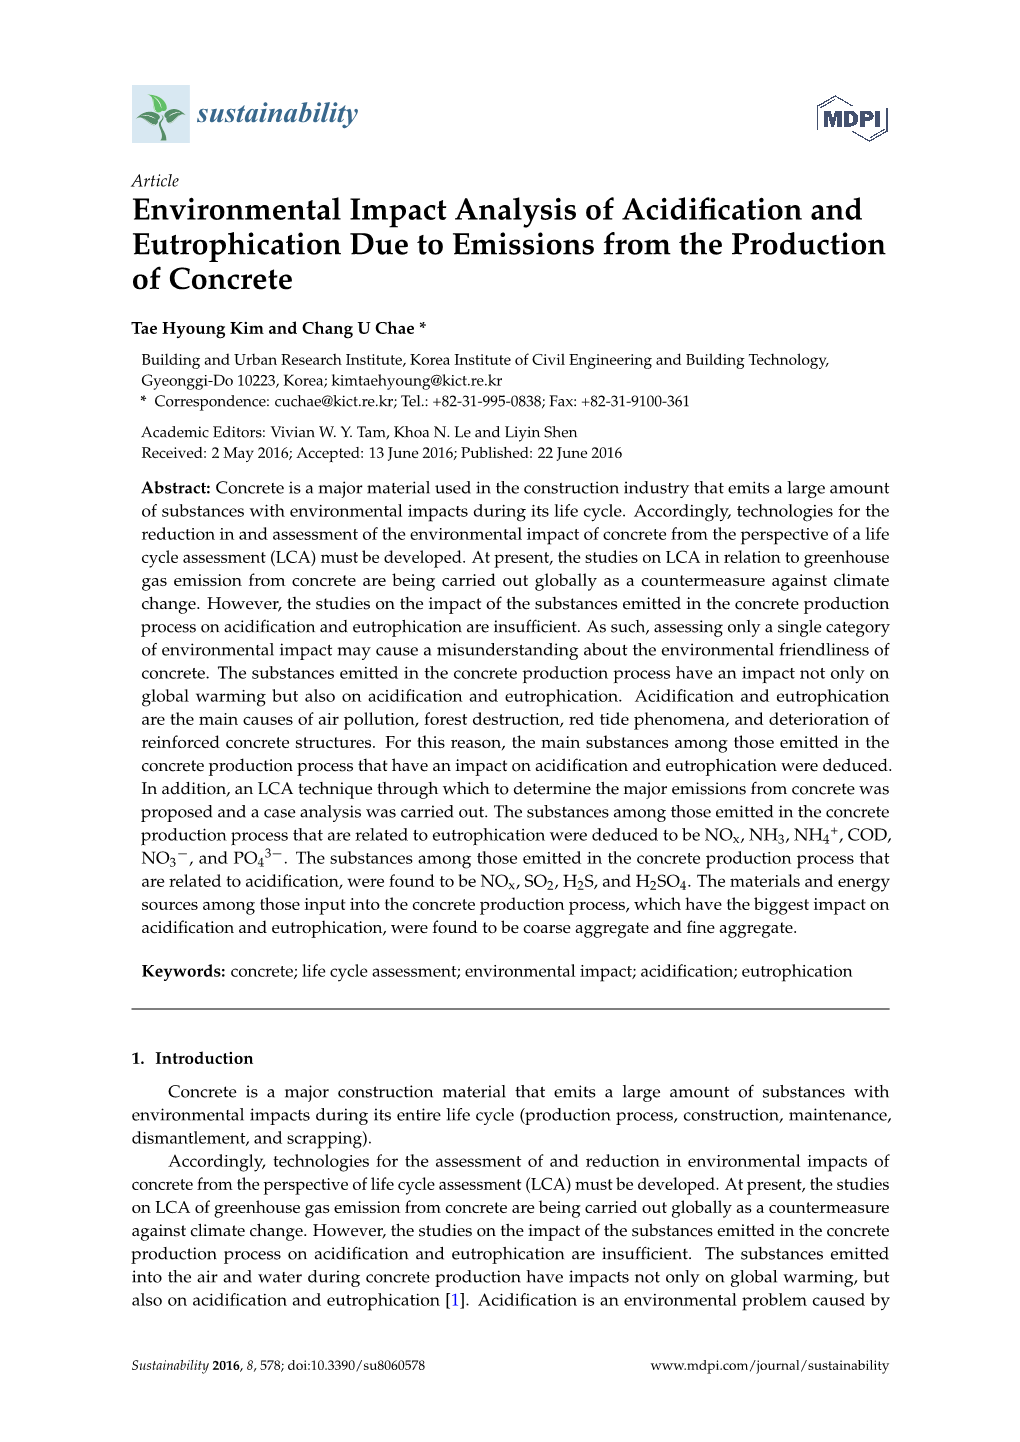 Environmental Impact Analysis of Acidification and Eutrophication